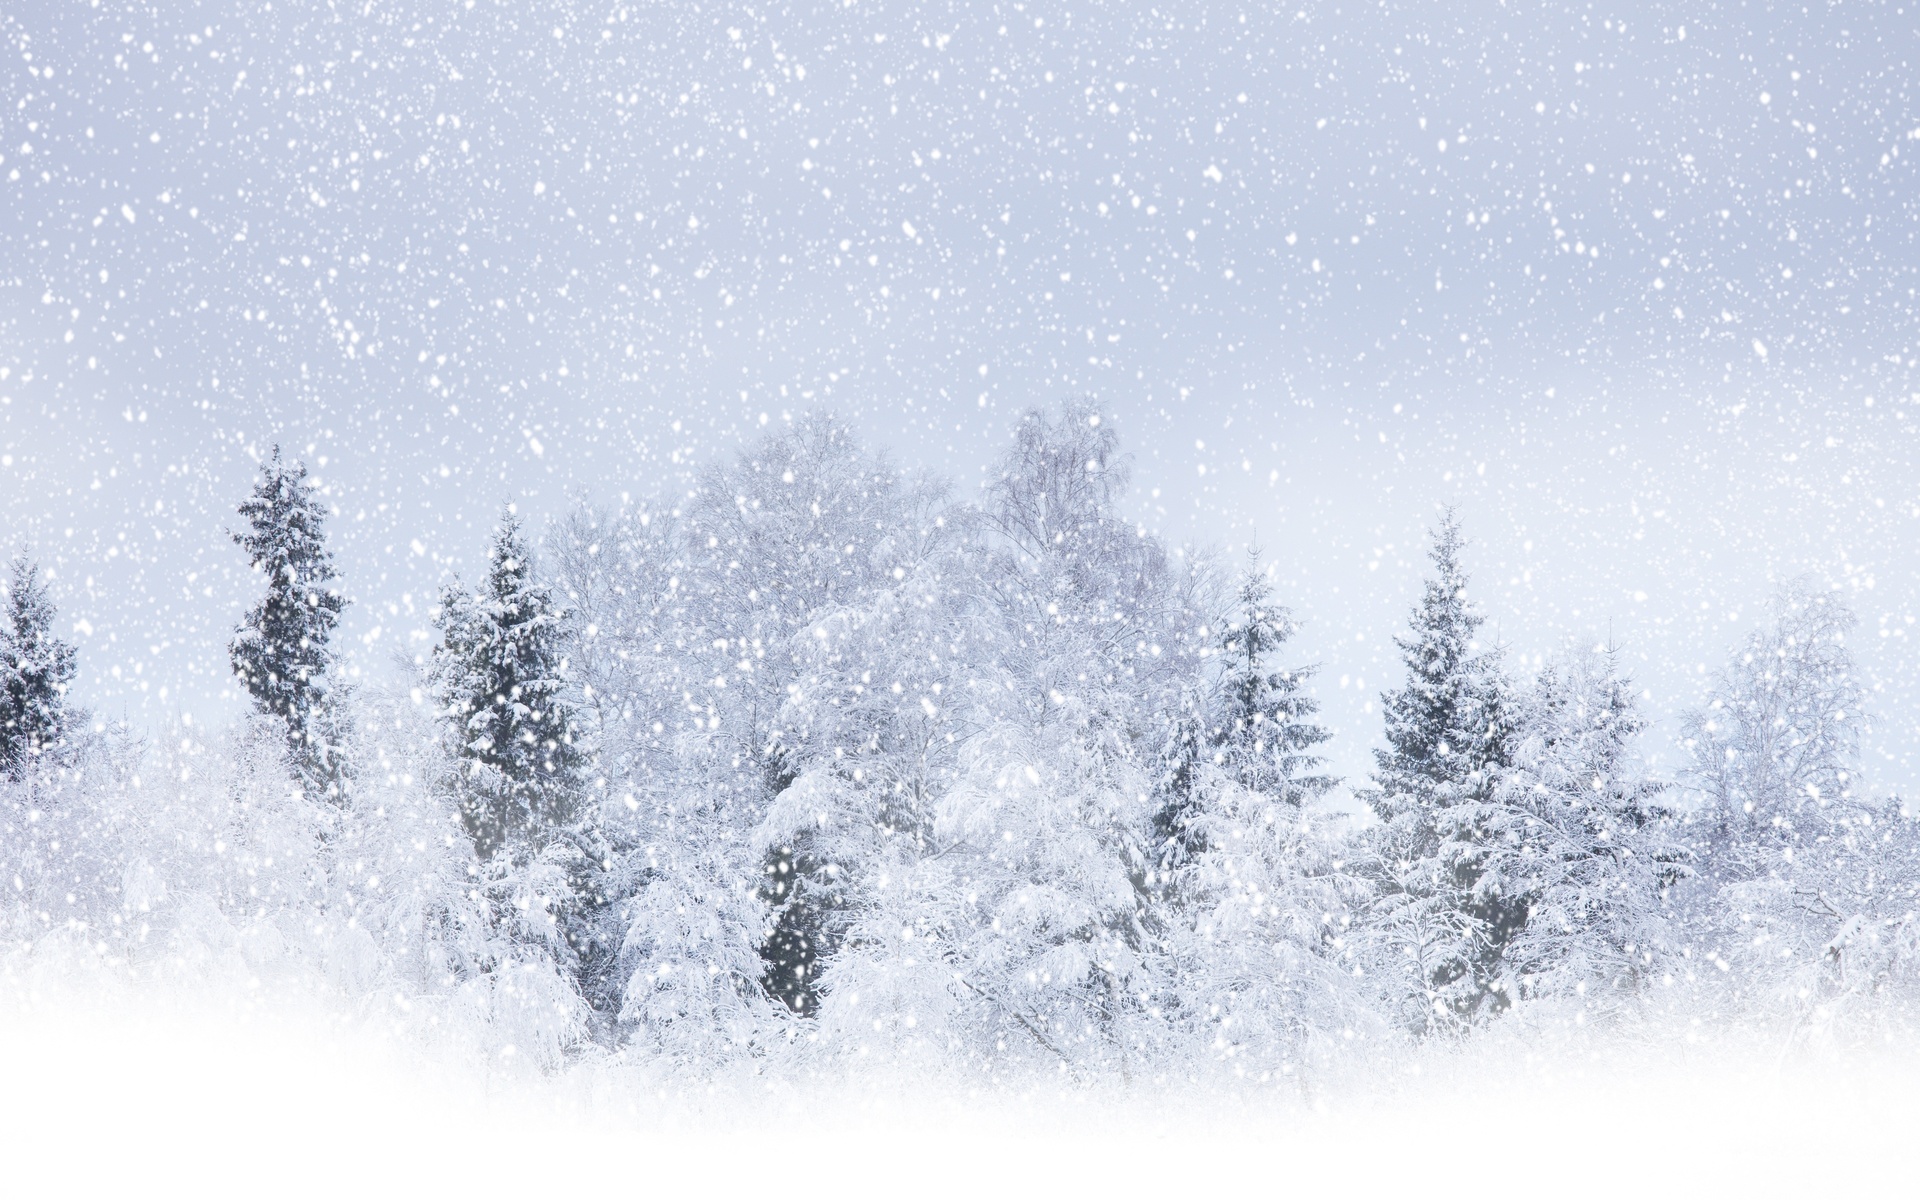 Nature Landscapes Trees Forest Winter Snow Seasons Snowing Snowfall